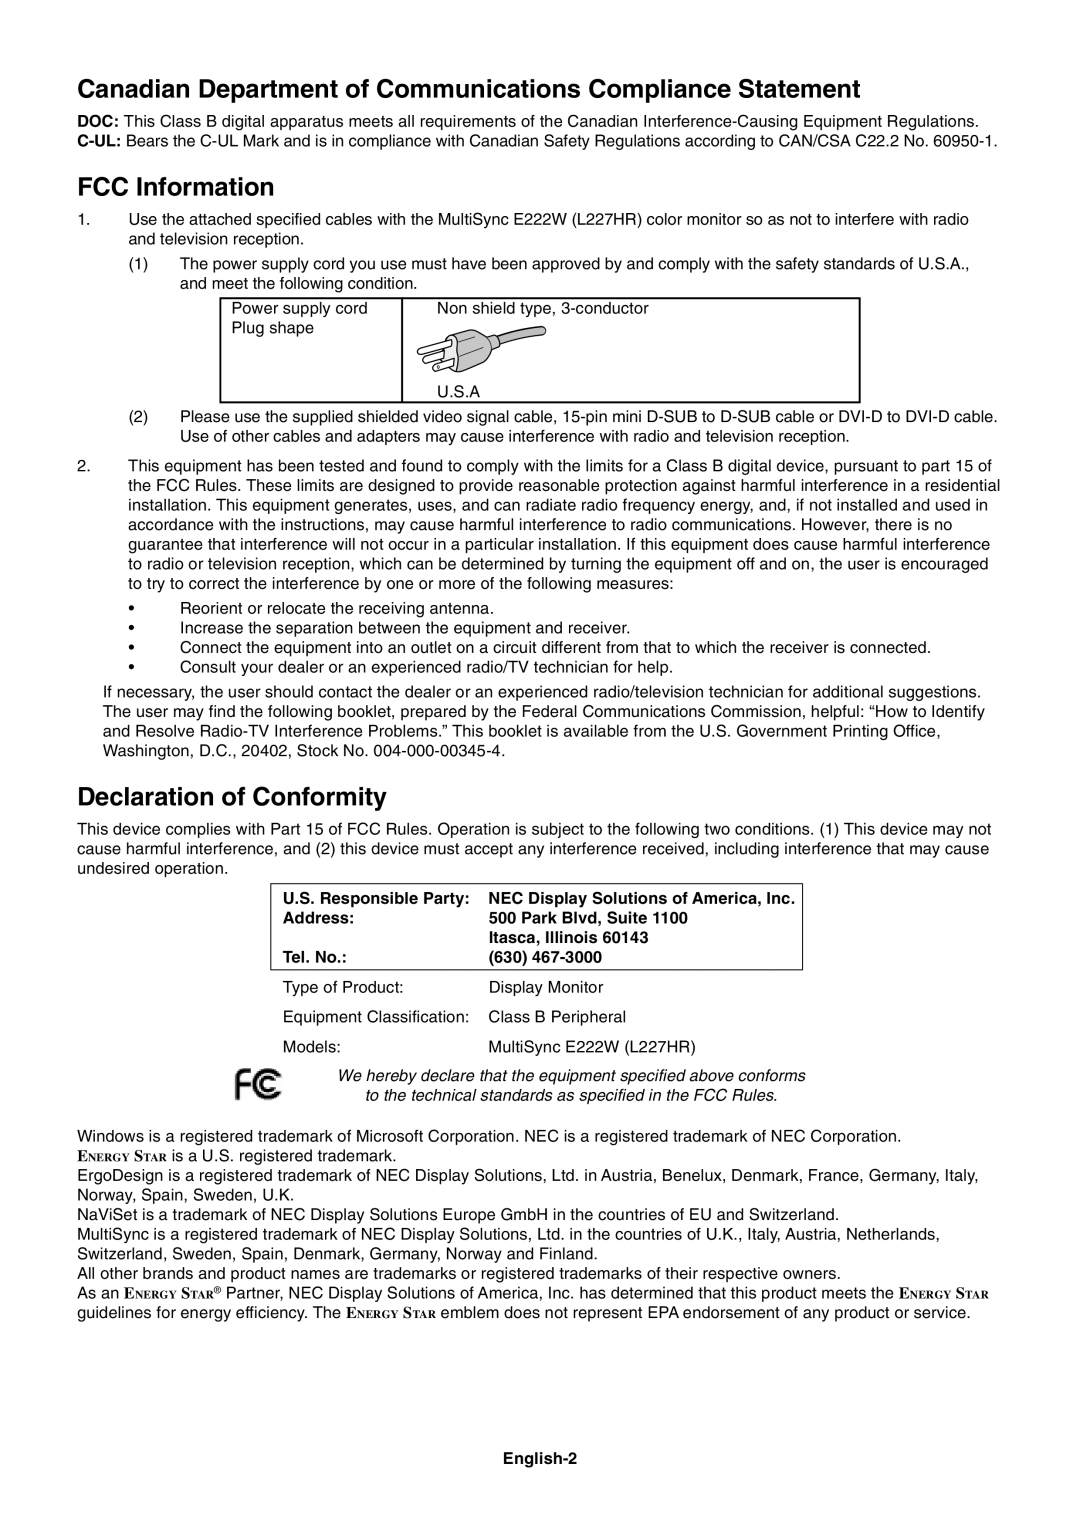 NEC L227HR Canadian Department of Communications Compliance Statement, FCC Information, Declaration of Conformity, Address 